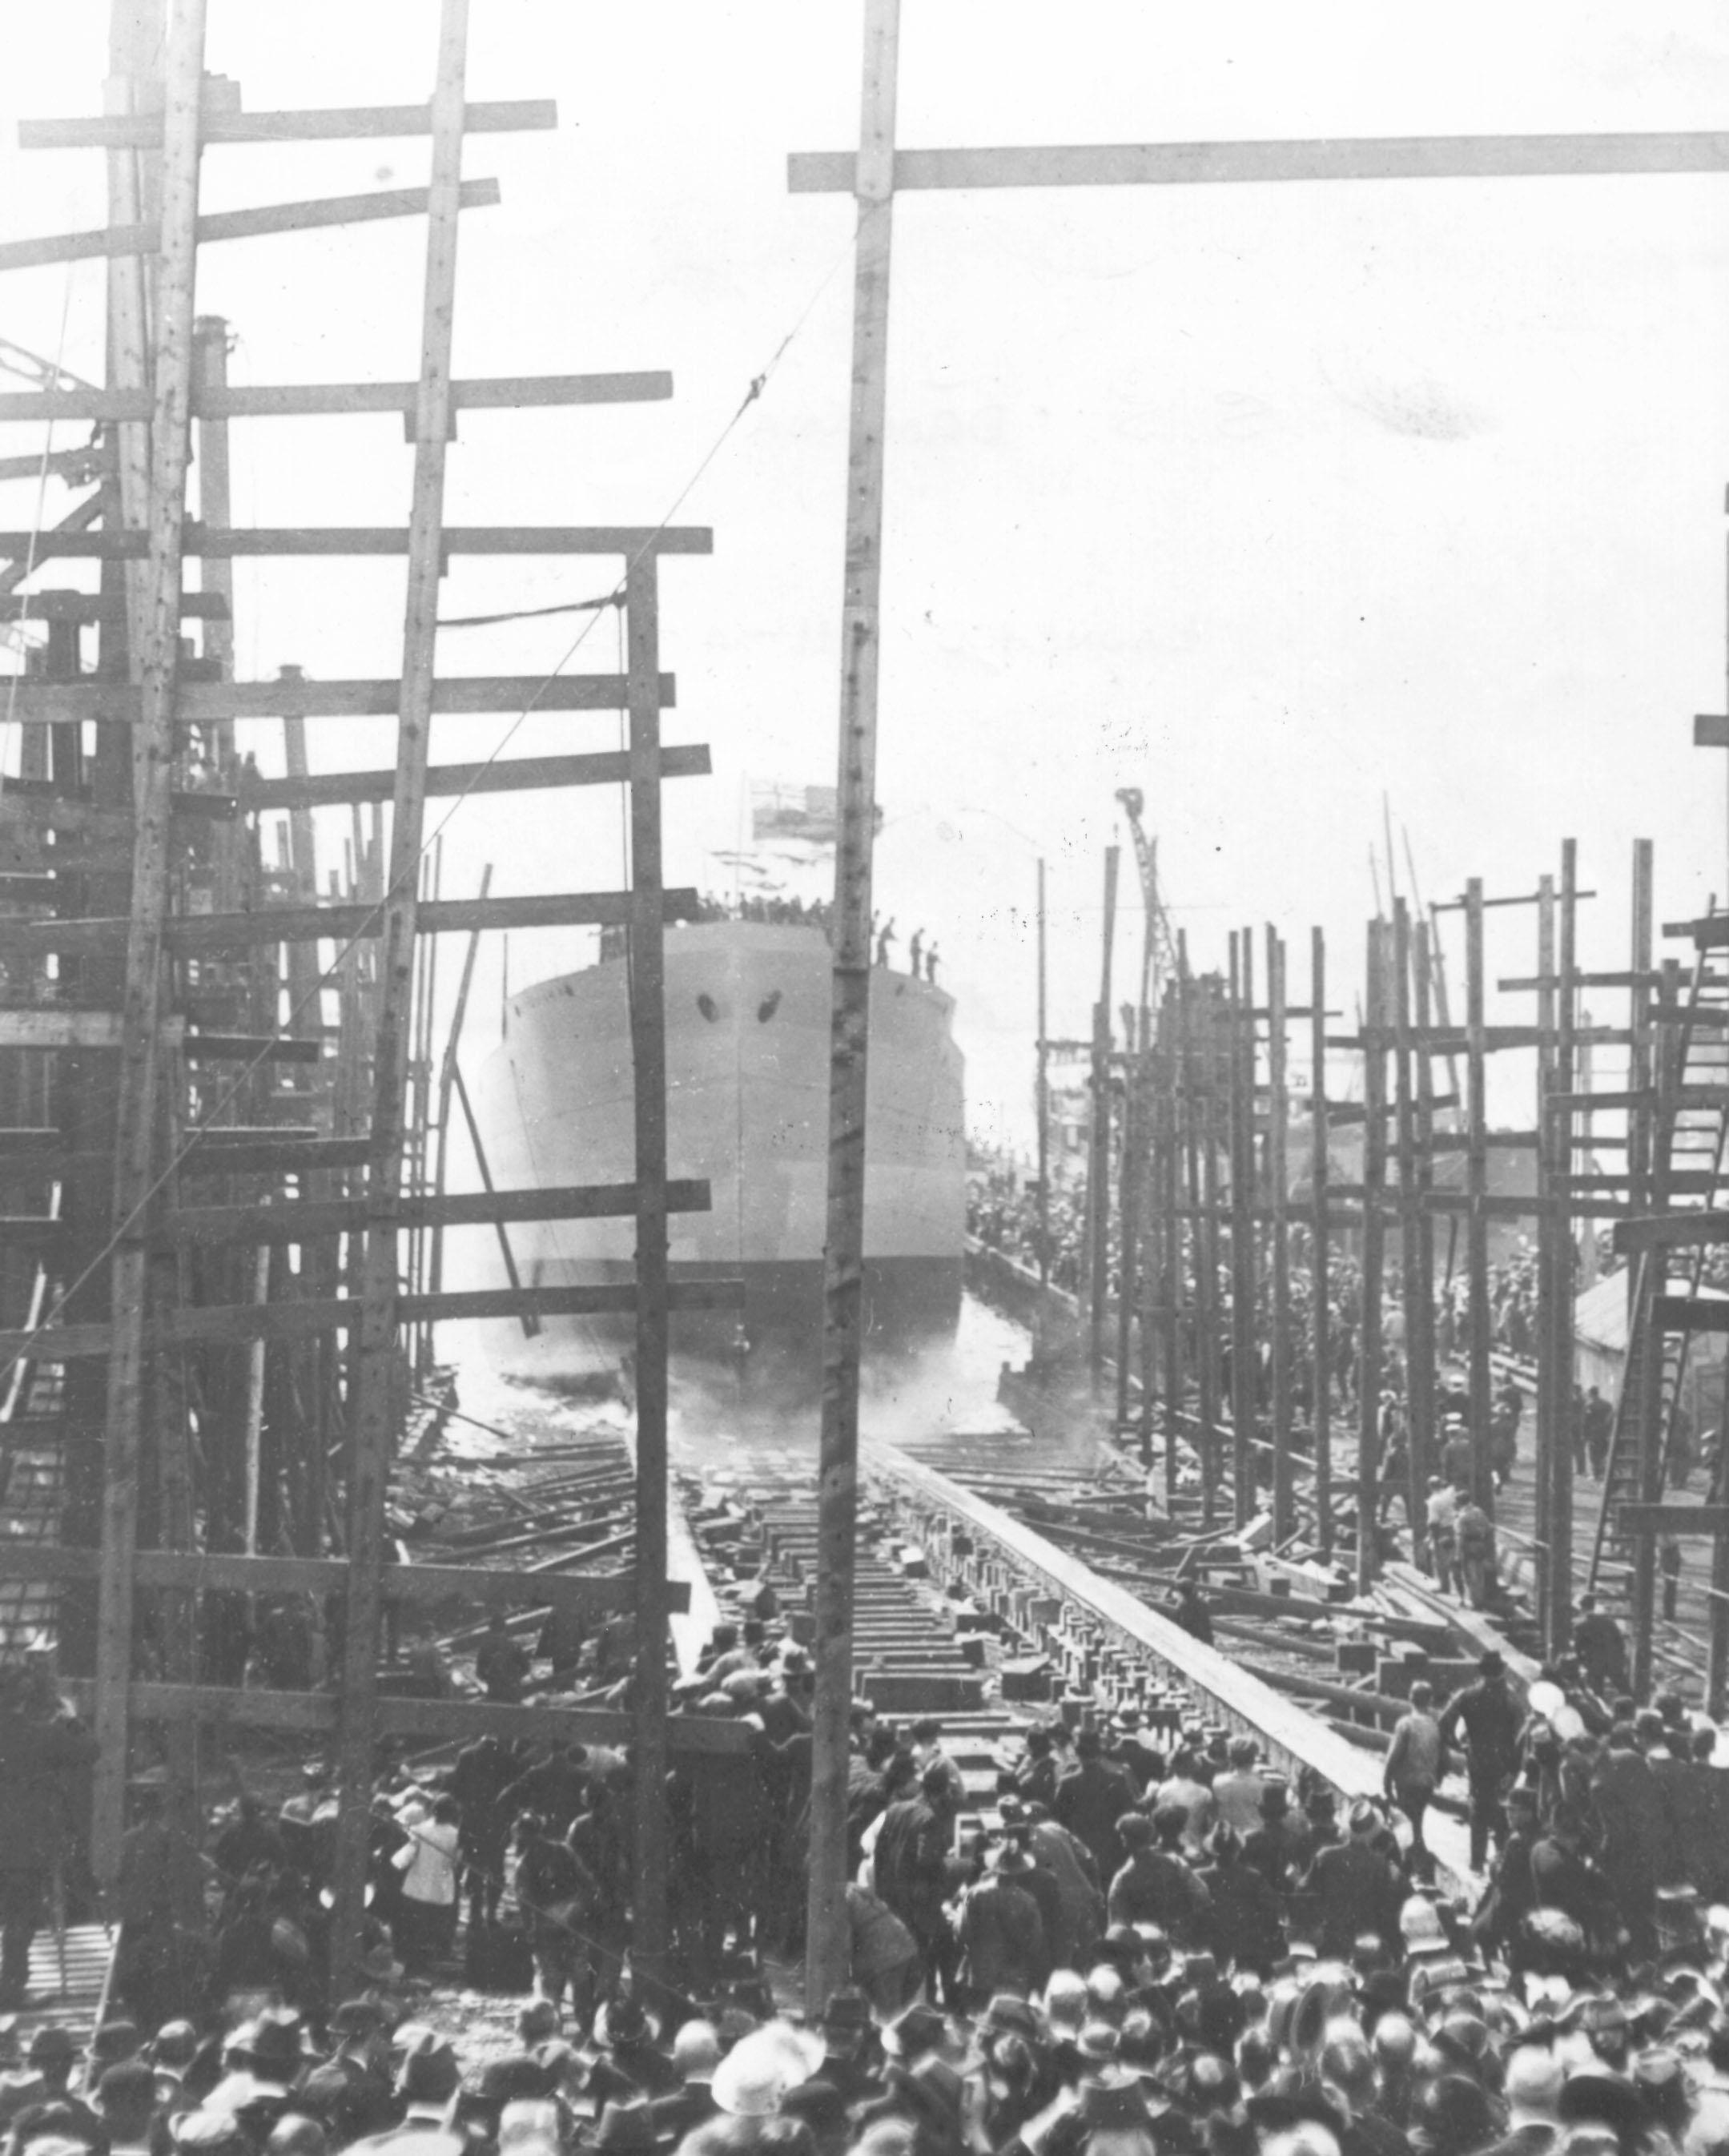 This image shows vessel being launched on 11/4/1919